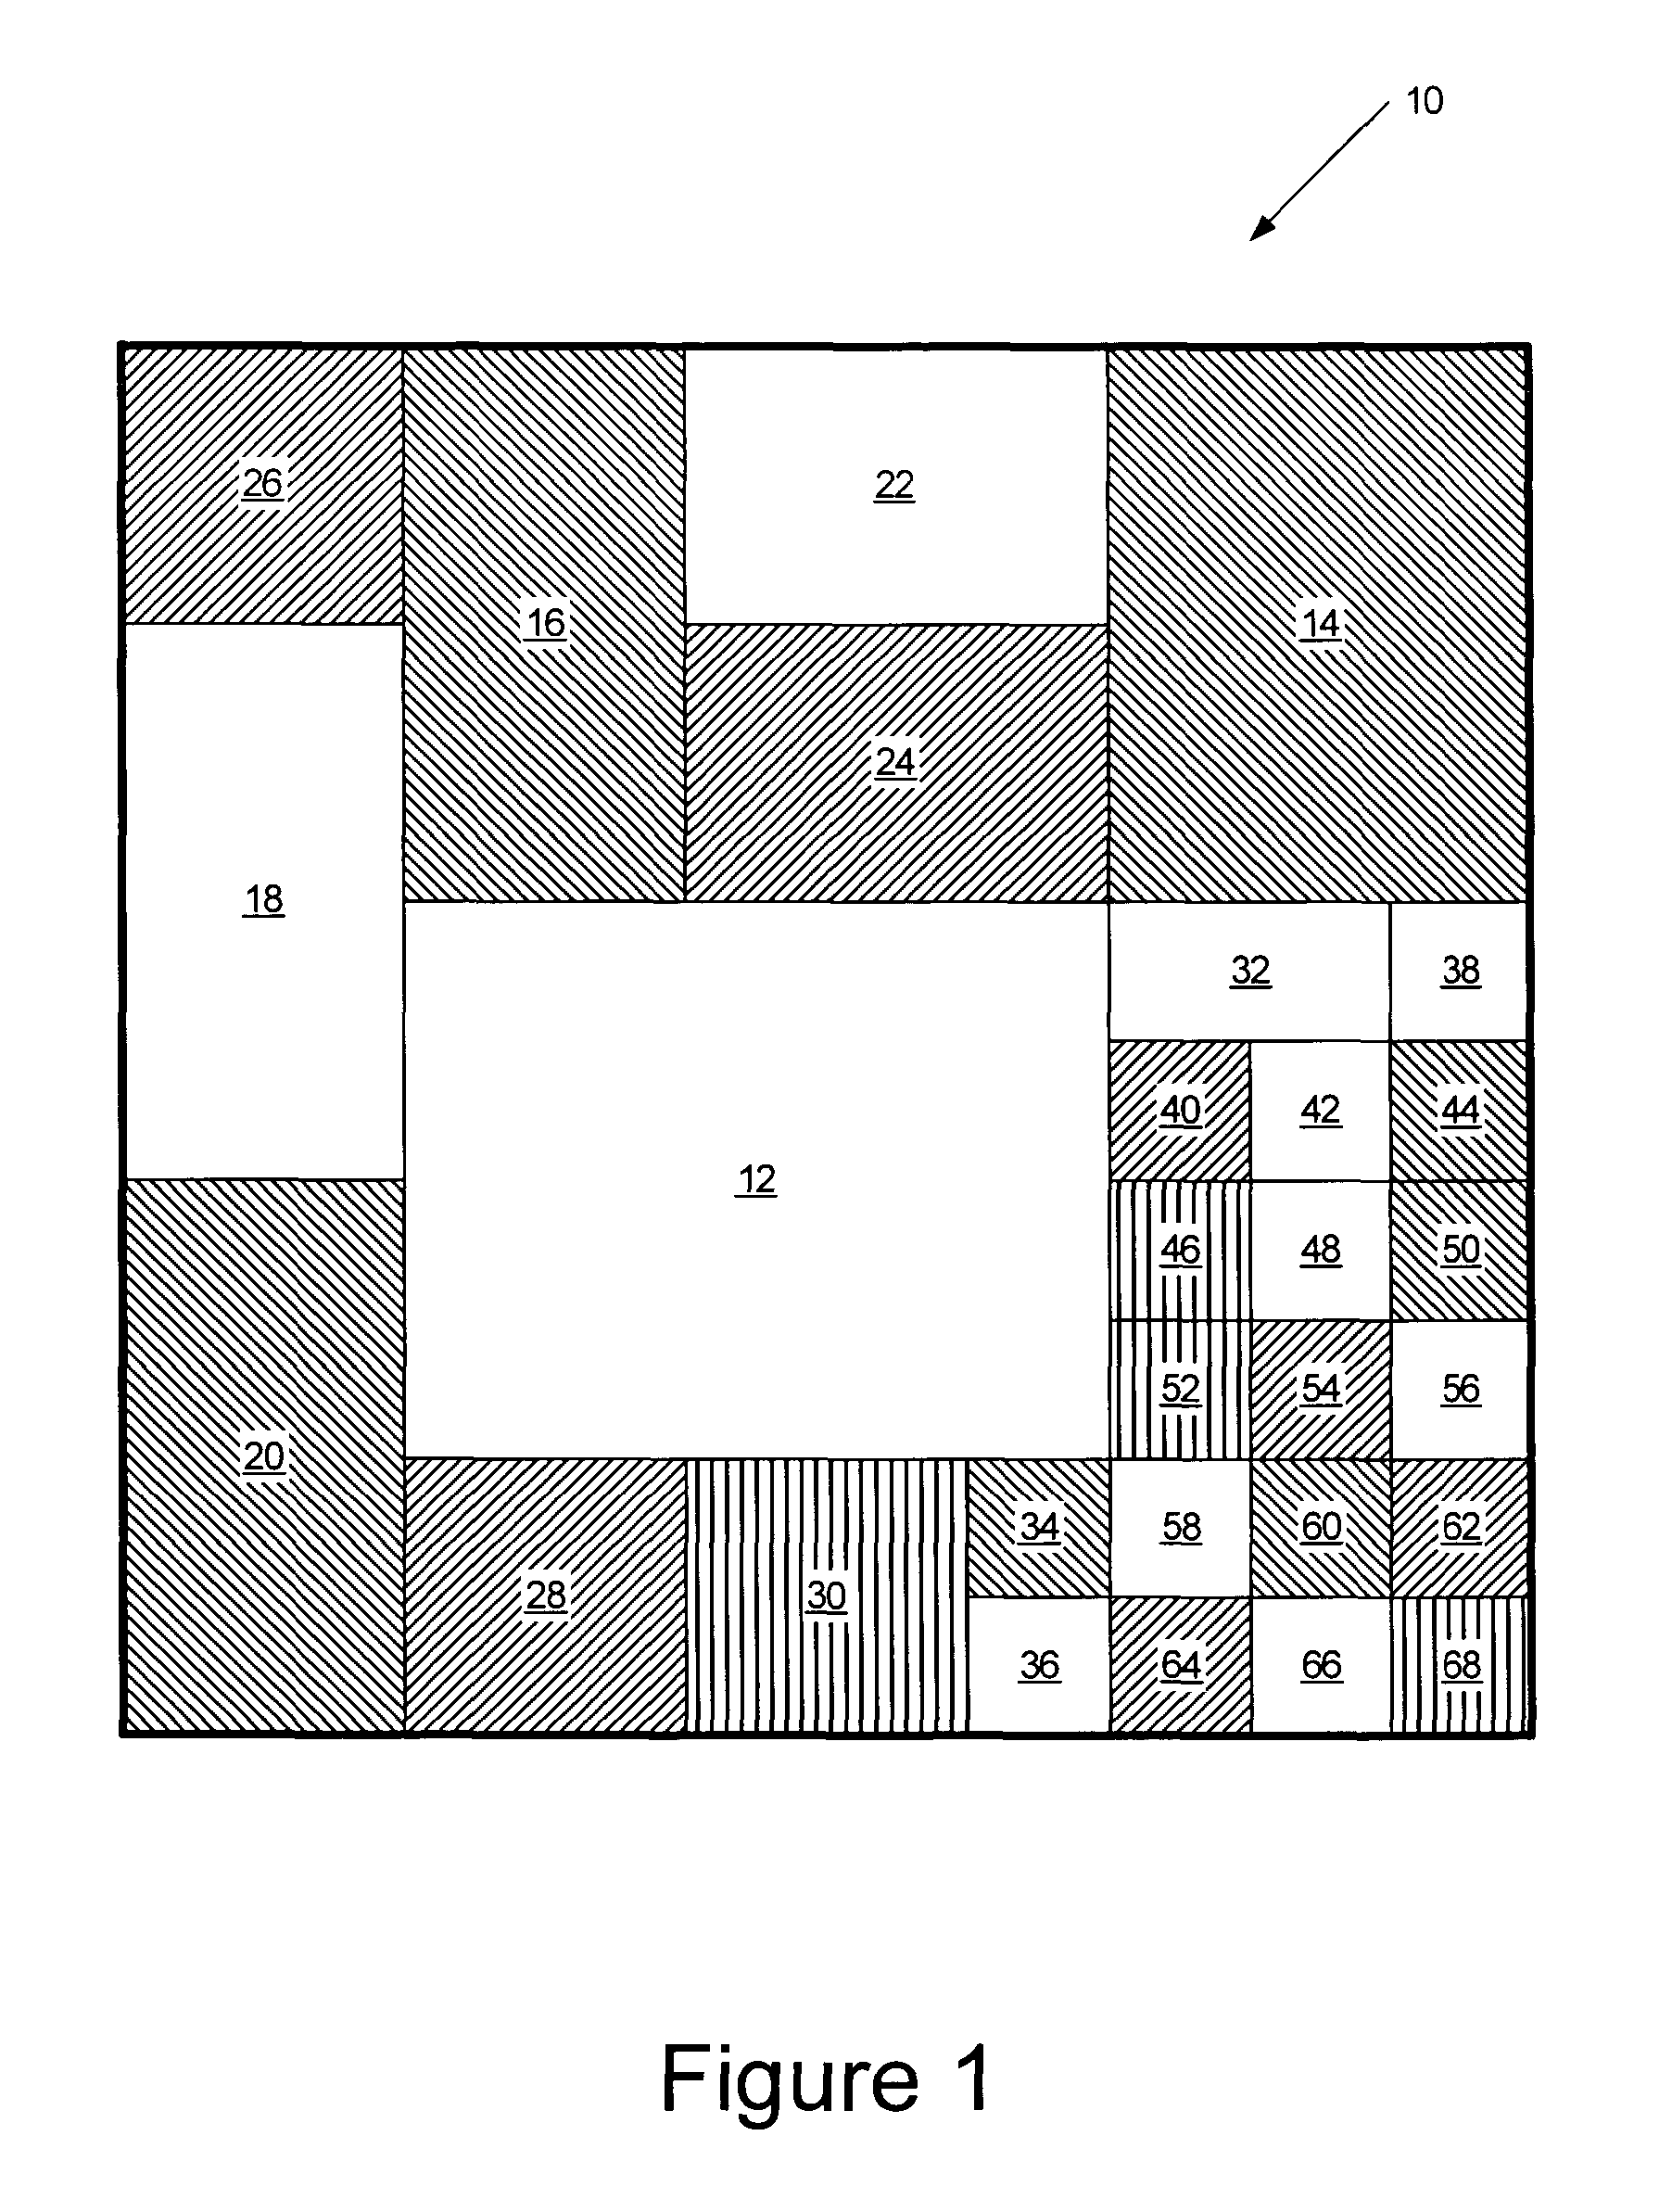 Methods, systems and computer program products for intelligent positioning of items in a tree map visualization